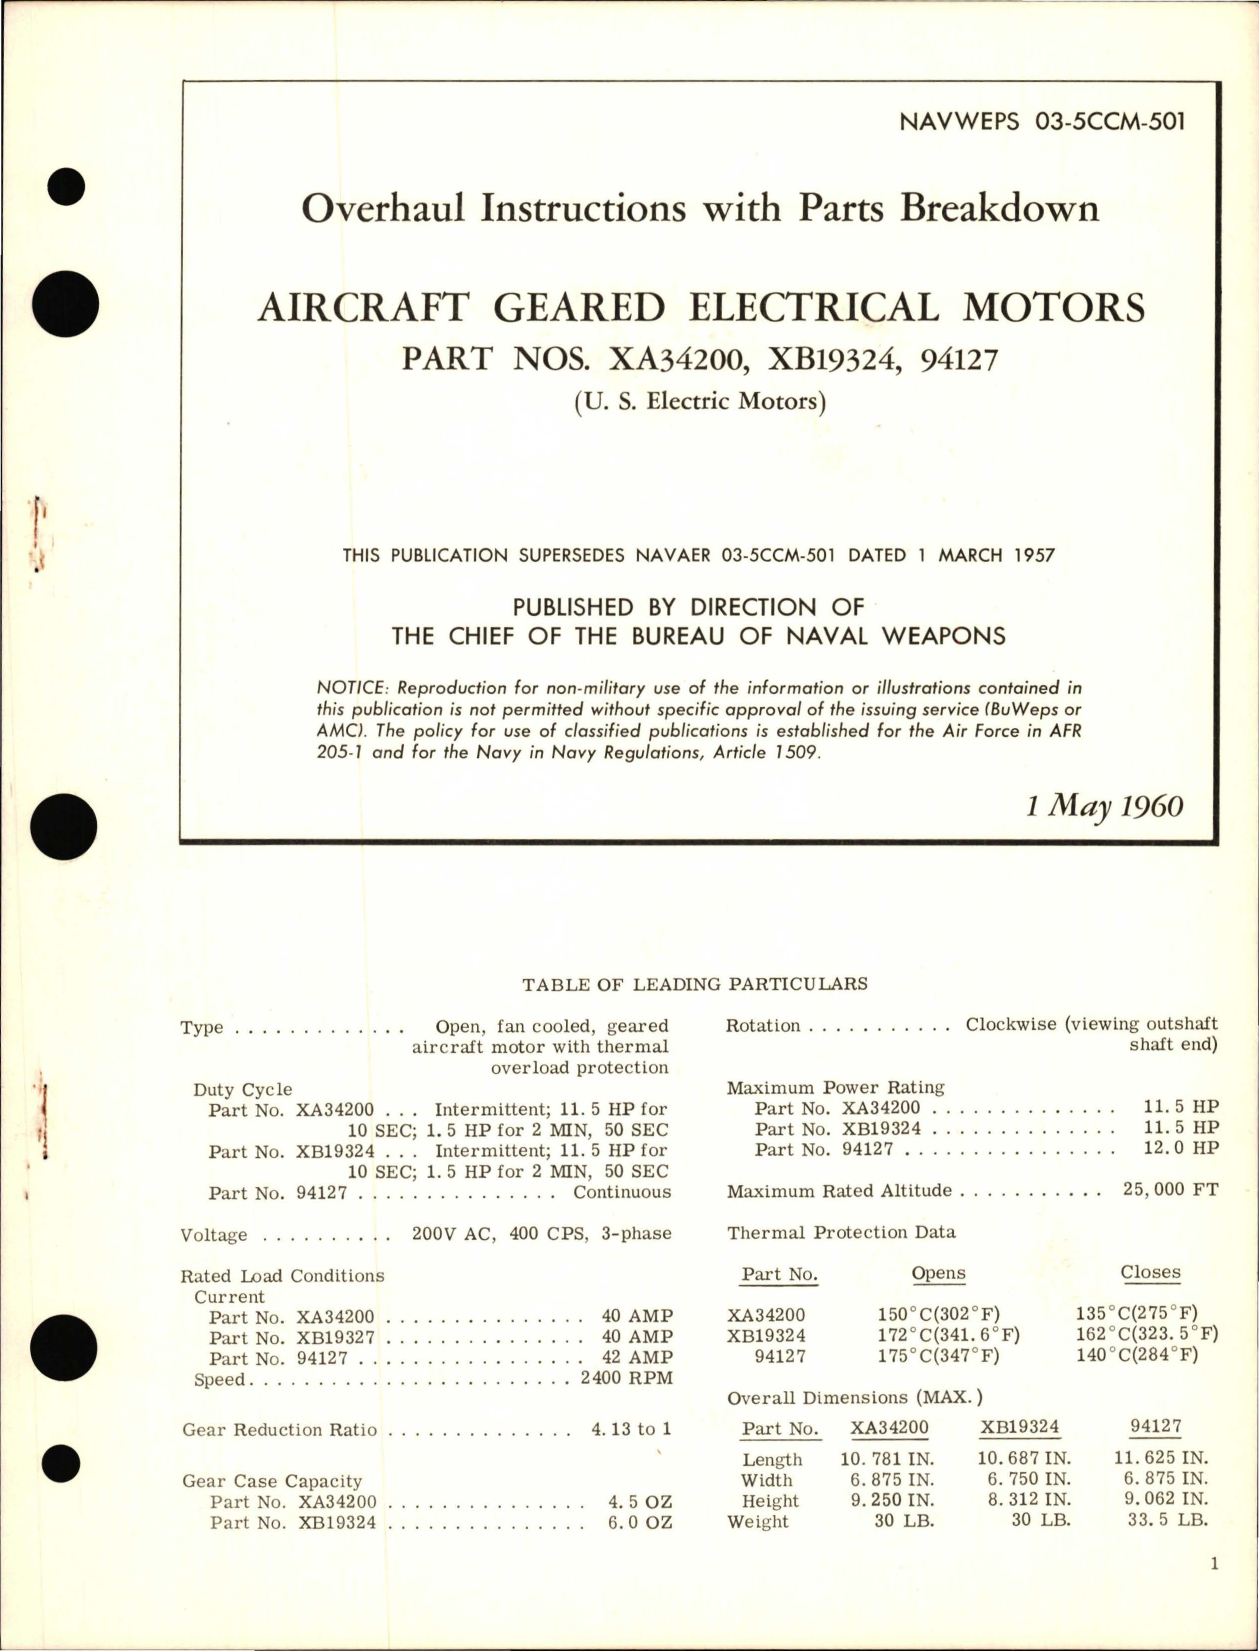 Sample page 1 from AirCorps Library document: Overhaul Instructions with Parts Breakdown for Aircraft Geared Electrical Motors - Part XA34200, XB19324 and 94127